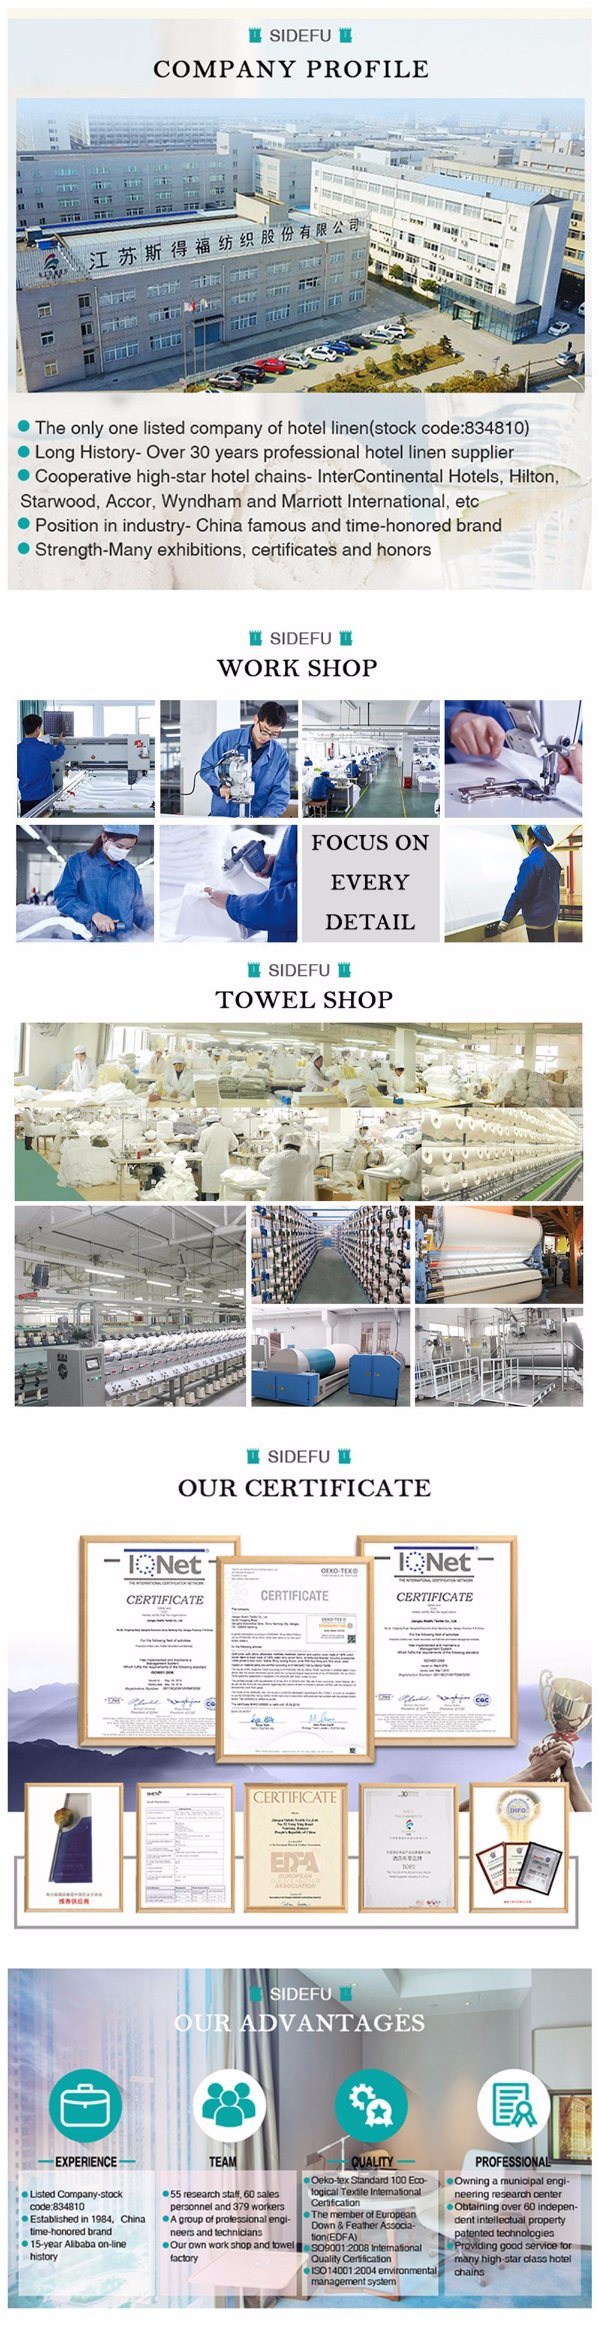 Good Quality Plain White100 % Cotton Hopsack Weave Towel for Hotel